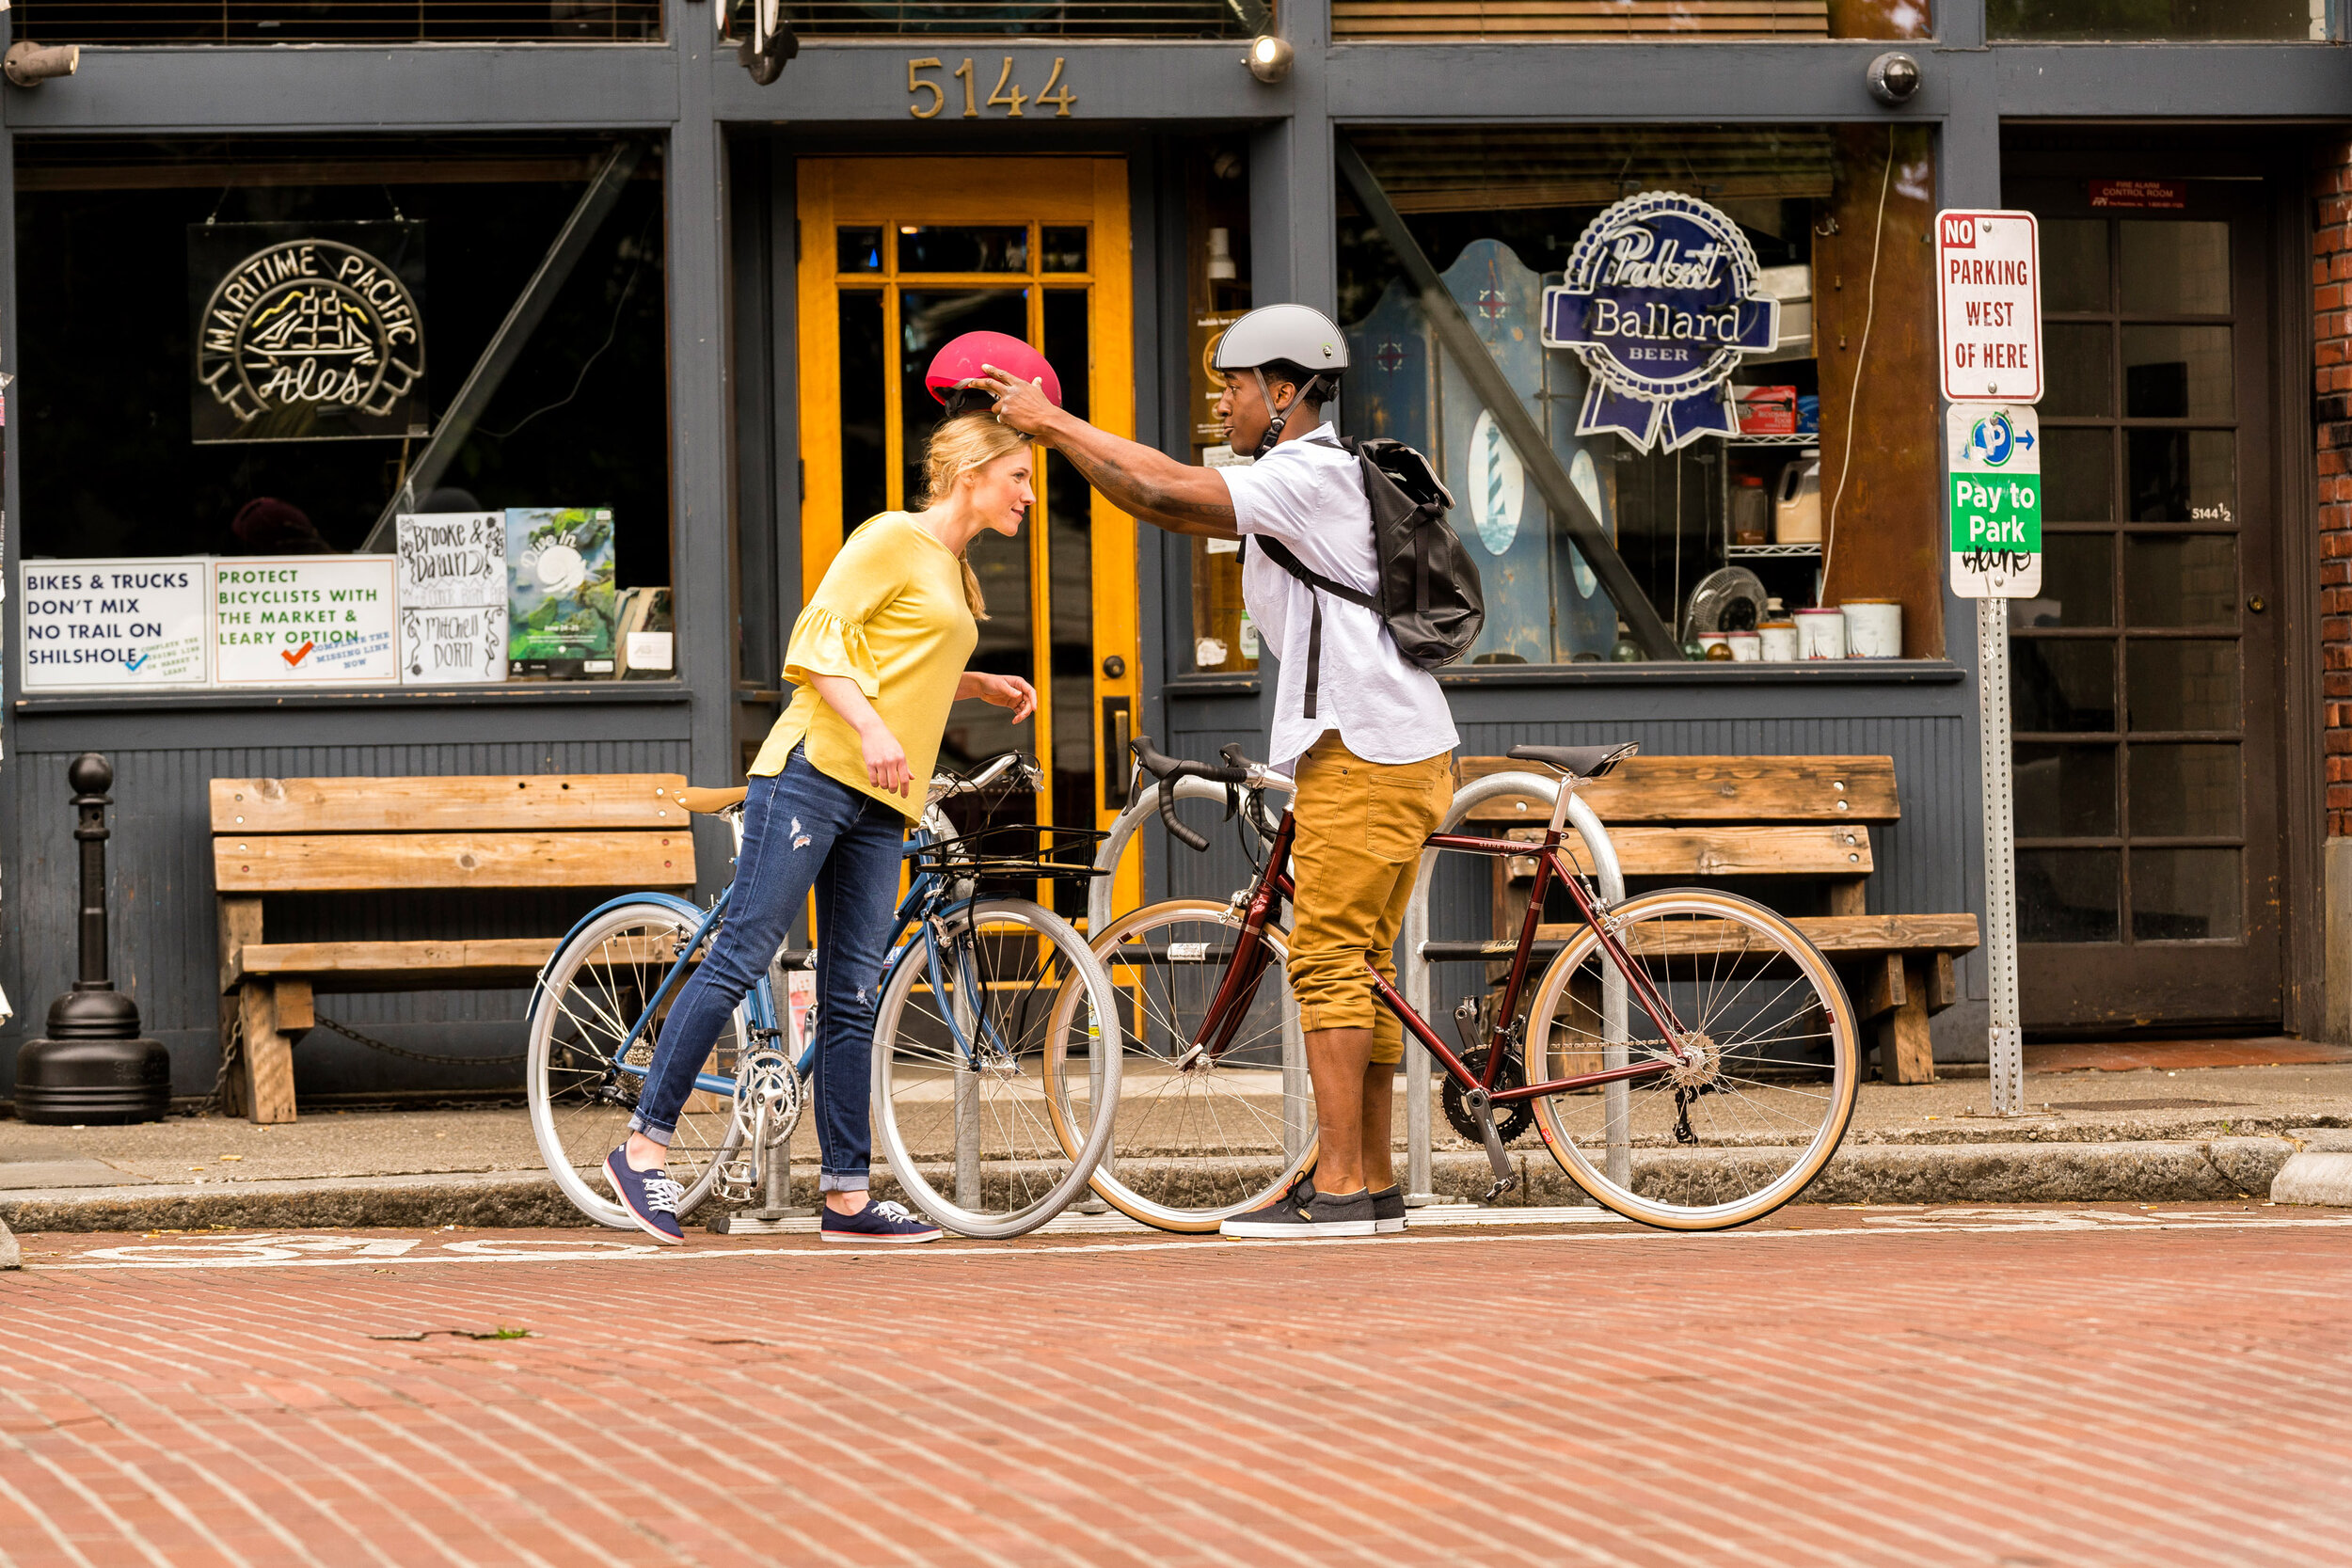  Lifestyle: Roger Johnson and Leasle Crawford getting ready for a bike ride in Ballard, Seattle 